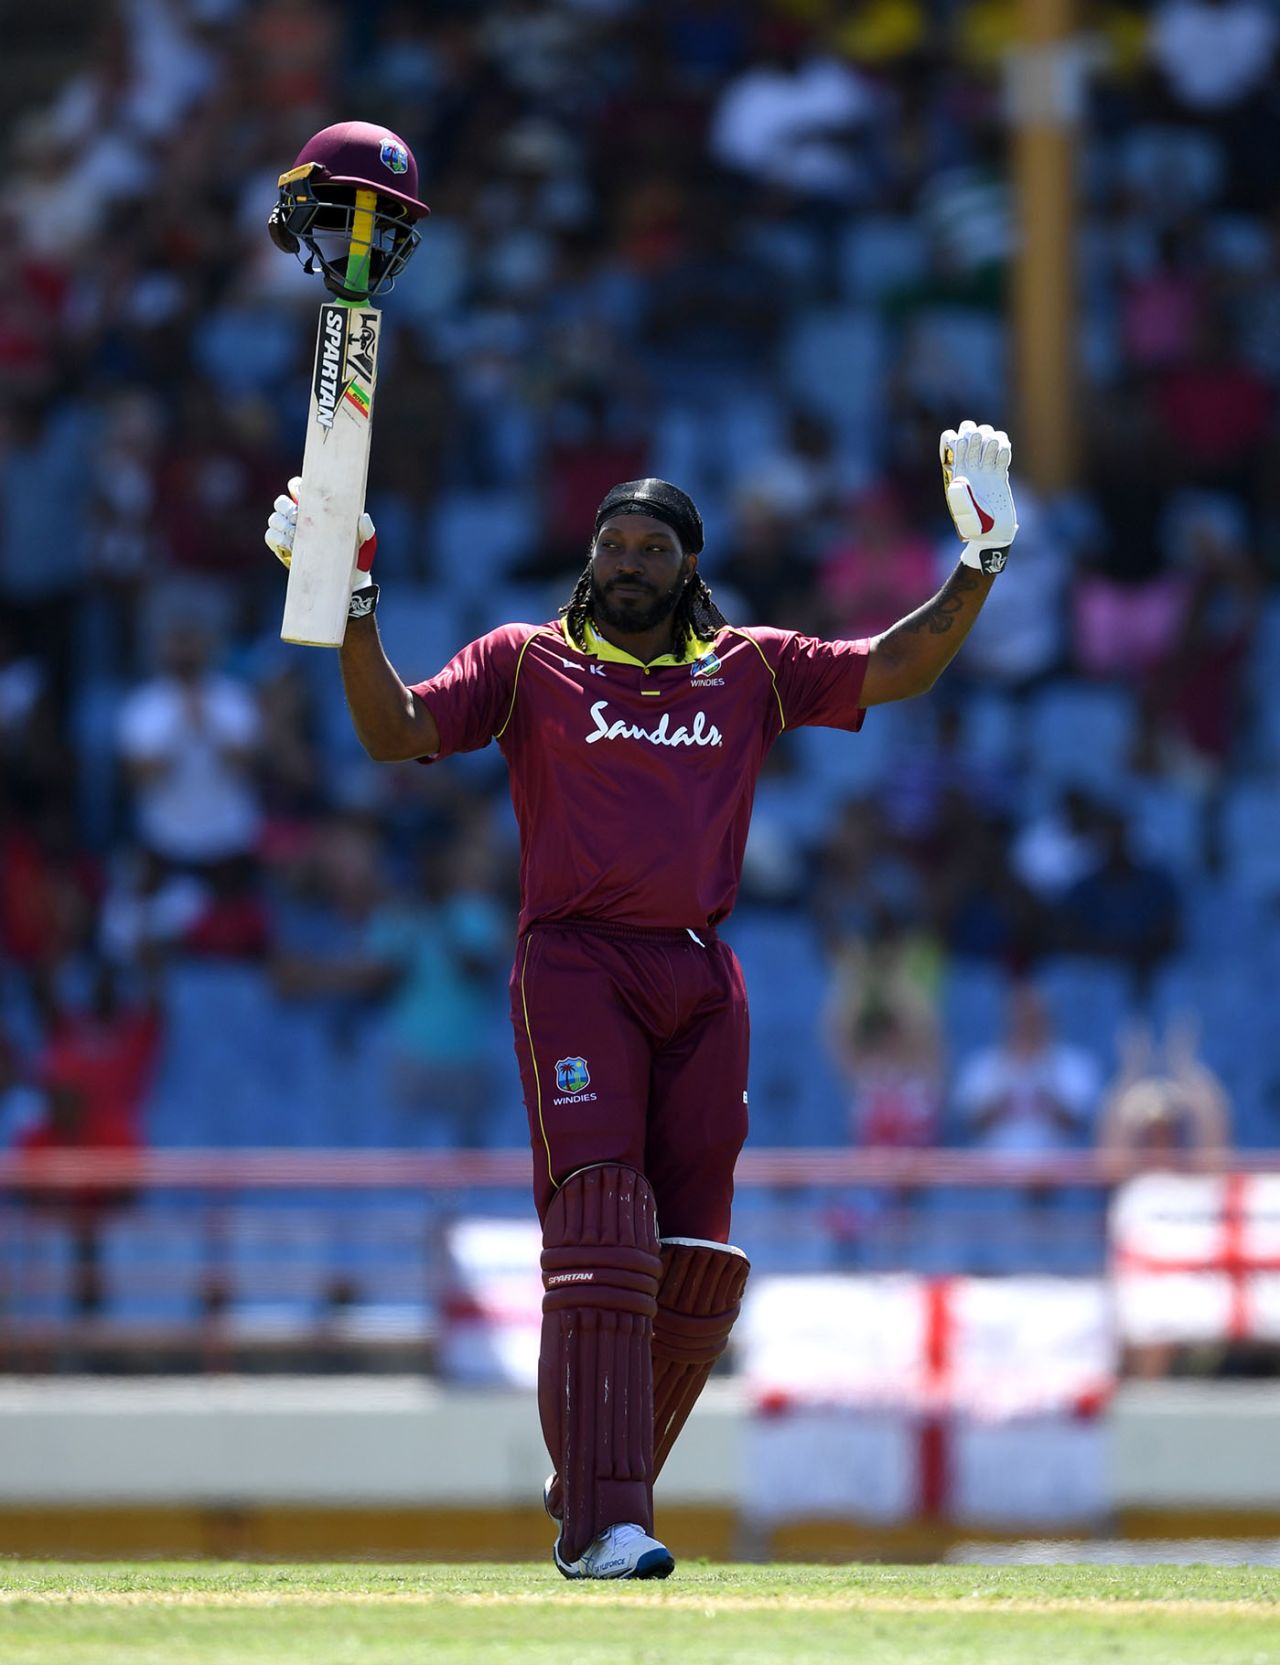 Chris Gayle cracked a 19-ball half-century, West Indies v England, 5th ODI, St Lucia, March 2, 2019 